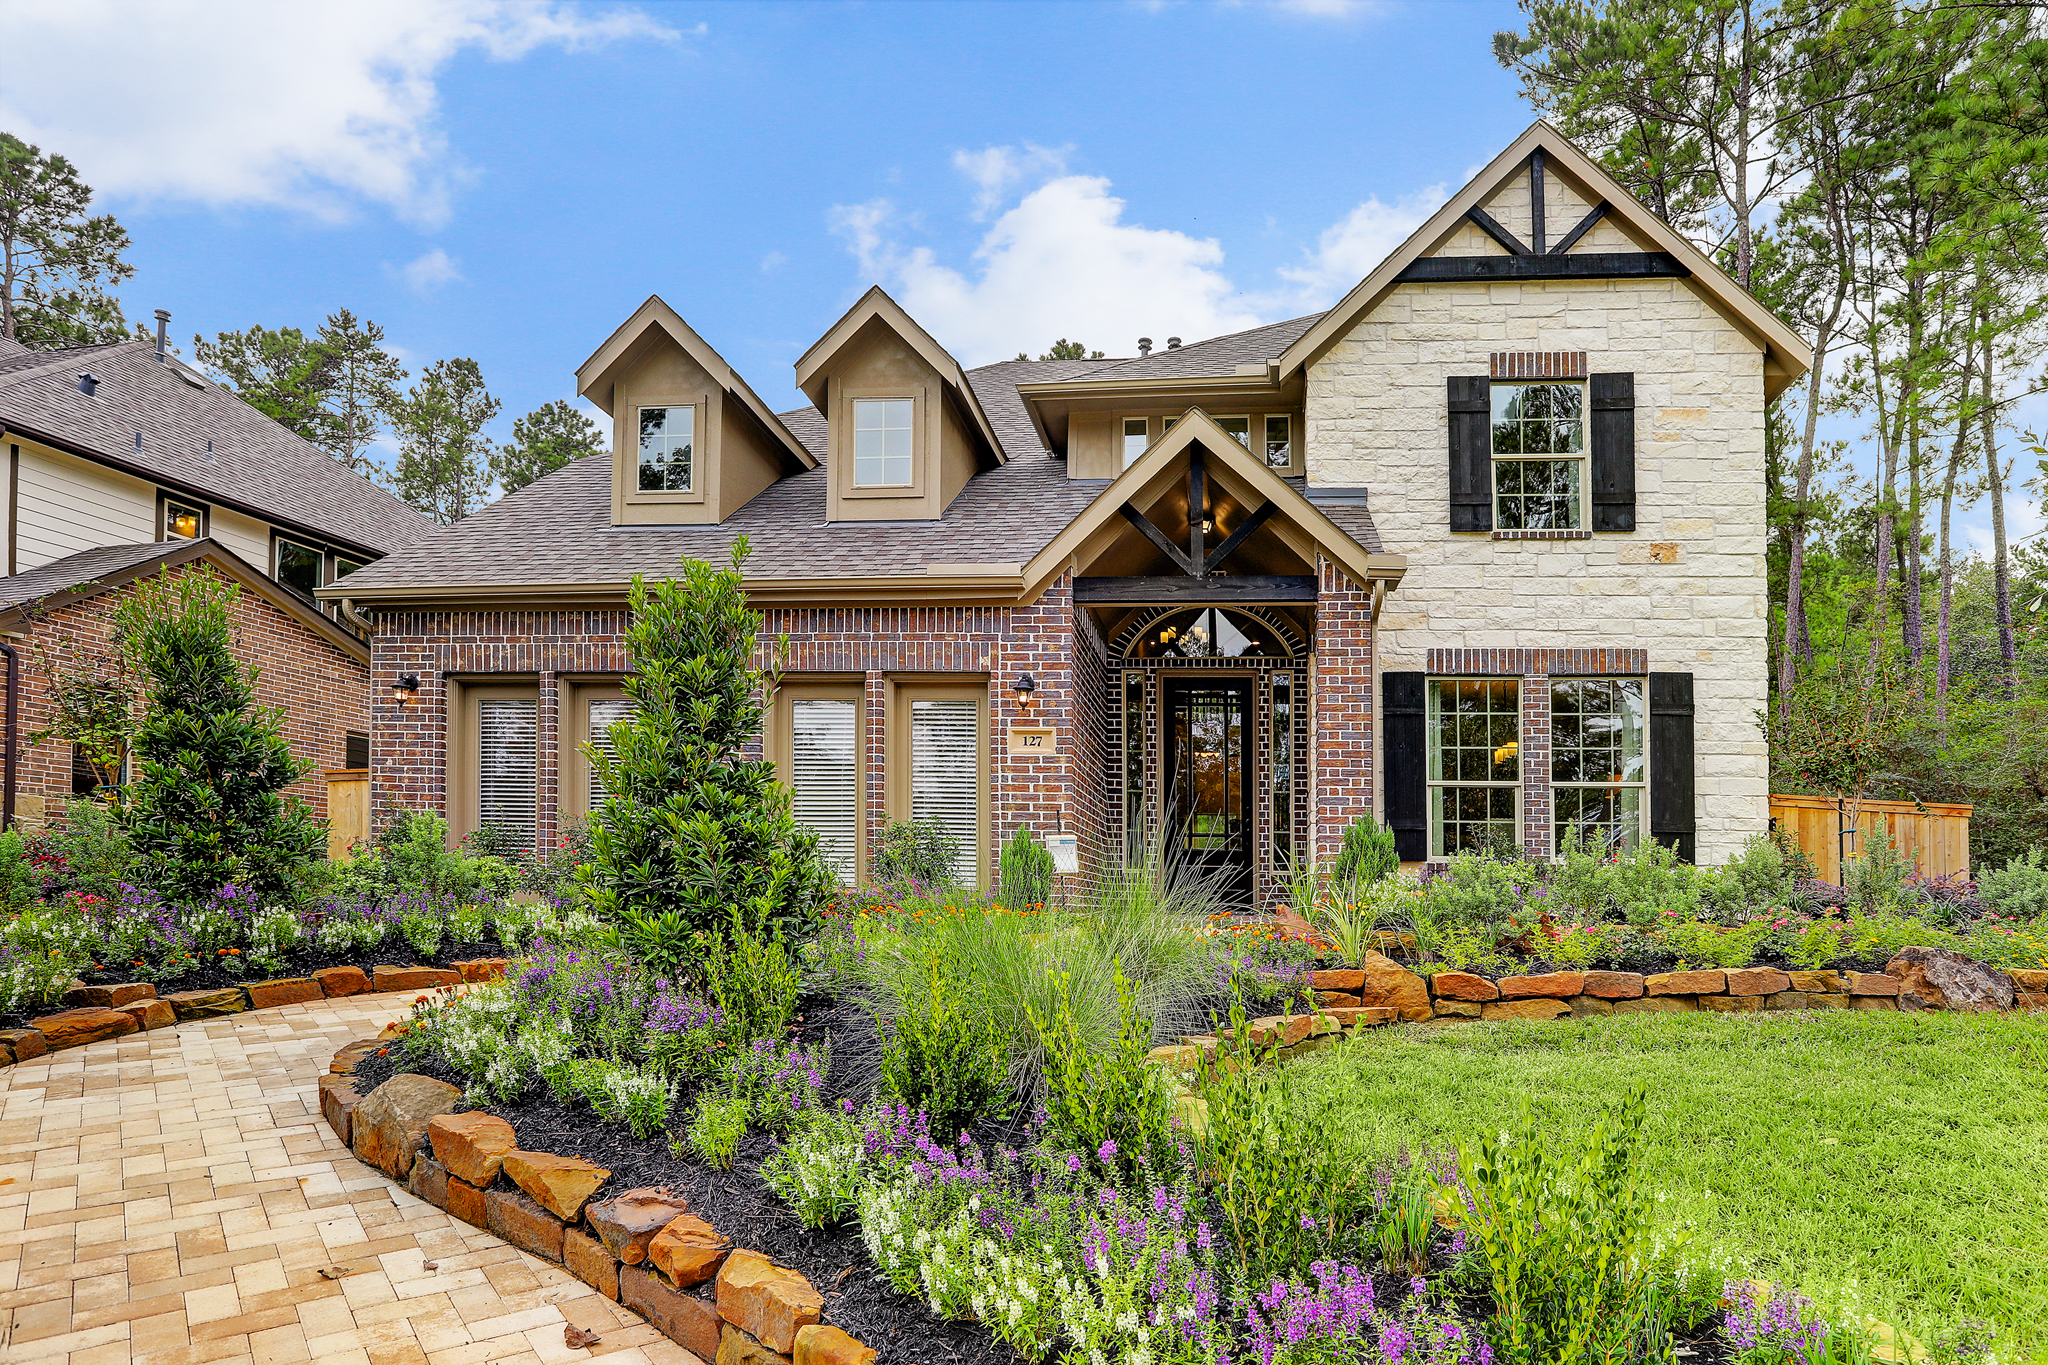 K. Hovnanian® Homes is now open in The Woodlands Hills, offering a variety of one- and two-story homes.